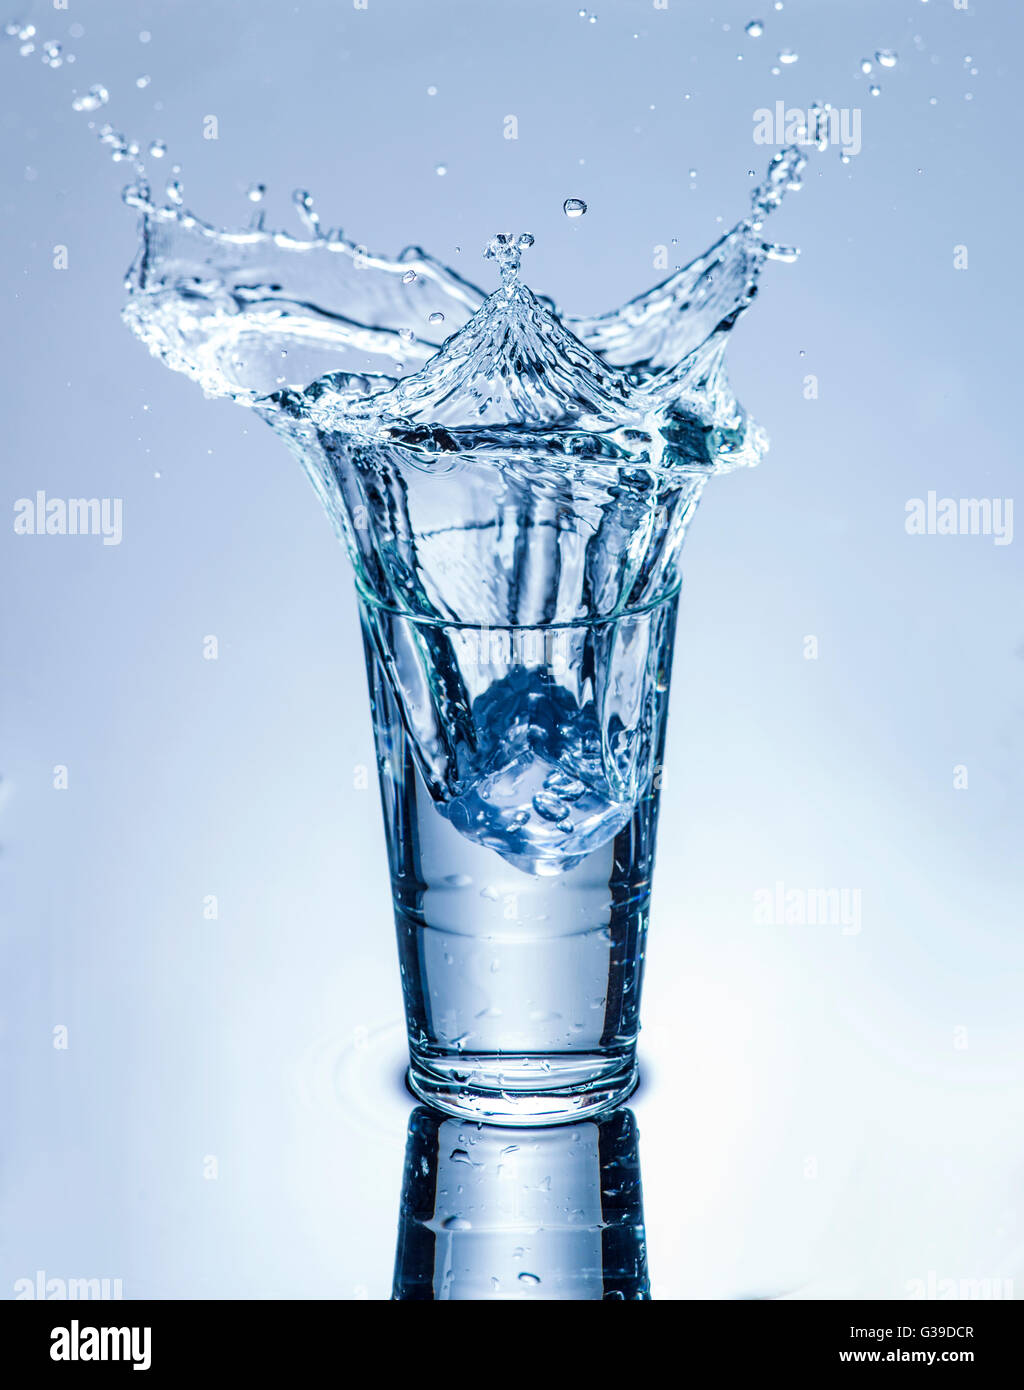 If my glass is filled with ice and water, will it overflow once